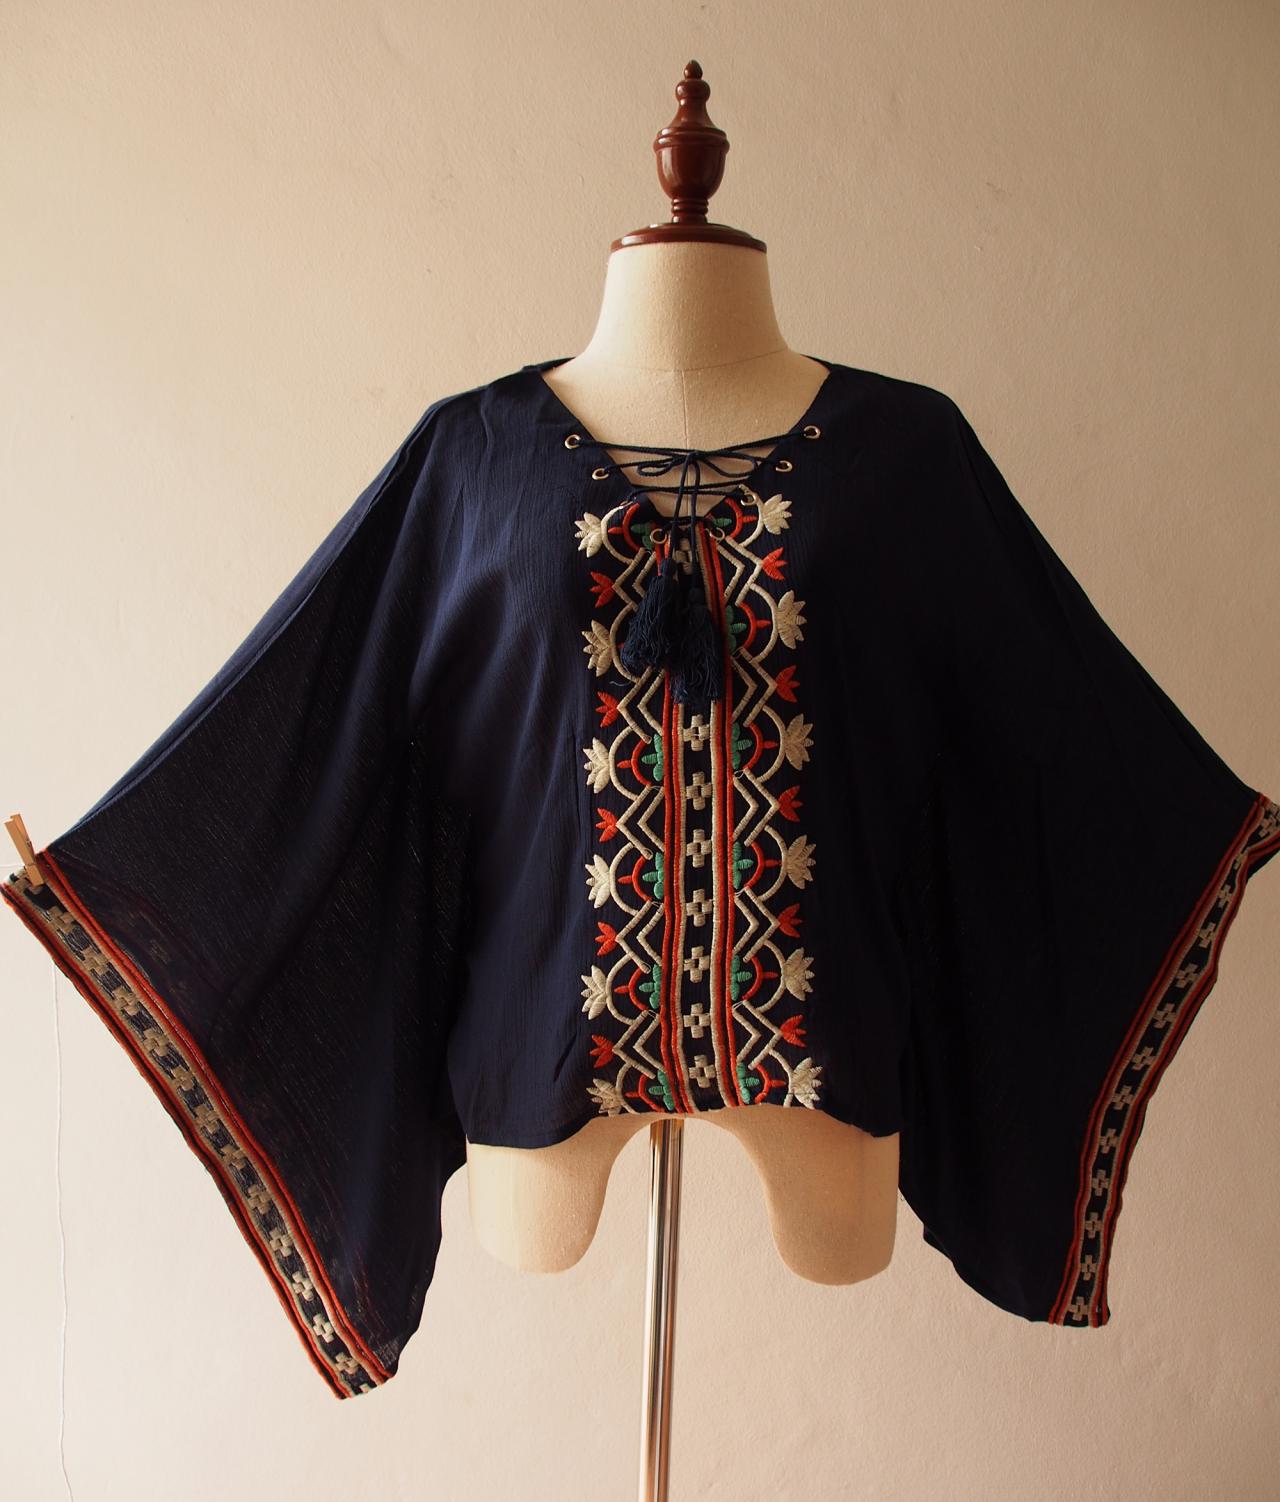 Navy Embroidery Poncho Top Boho Hippie Style Blouse Shirt - Size Us4-us8